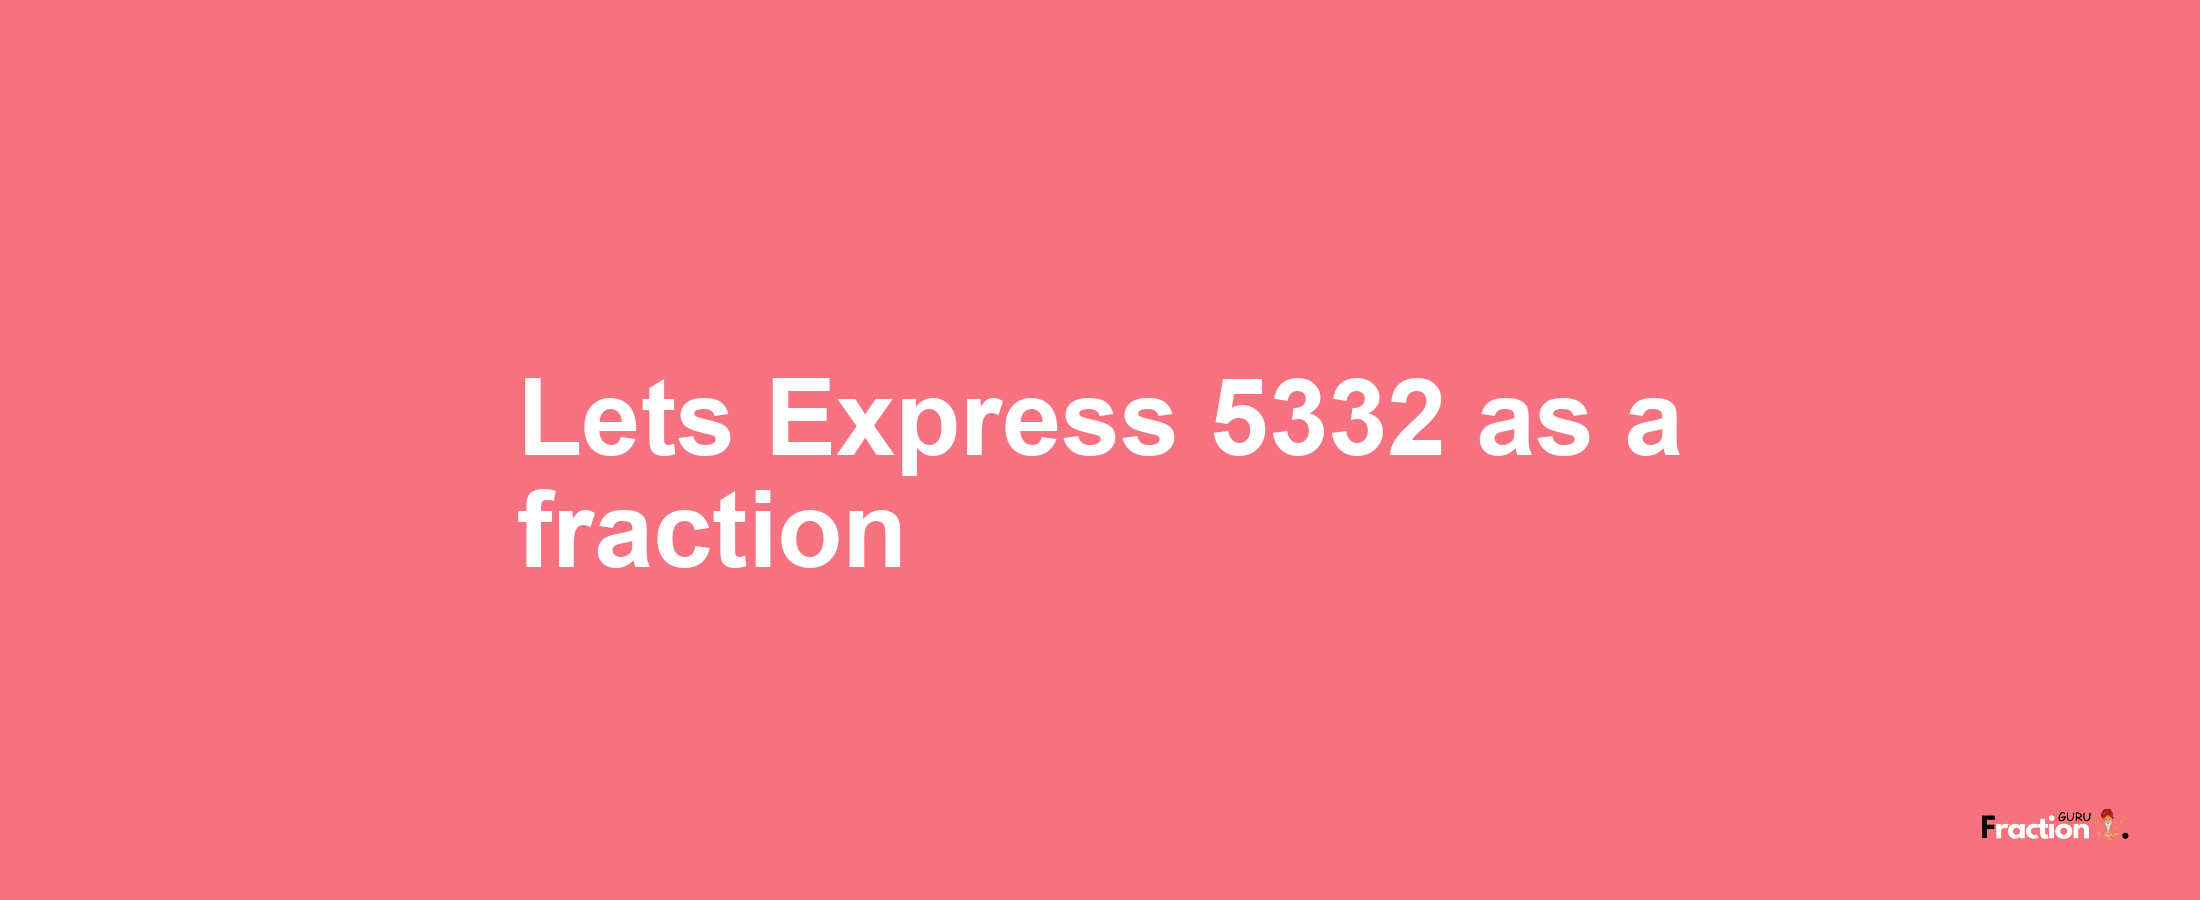 Lets Express 5332 as afraction